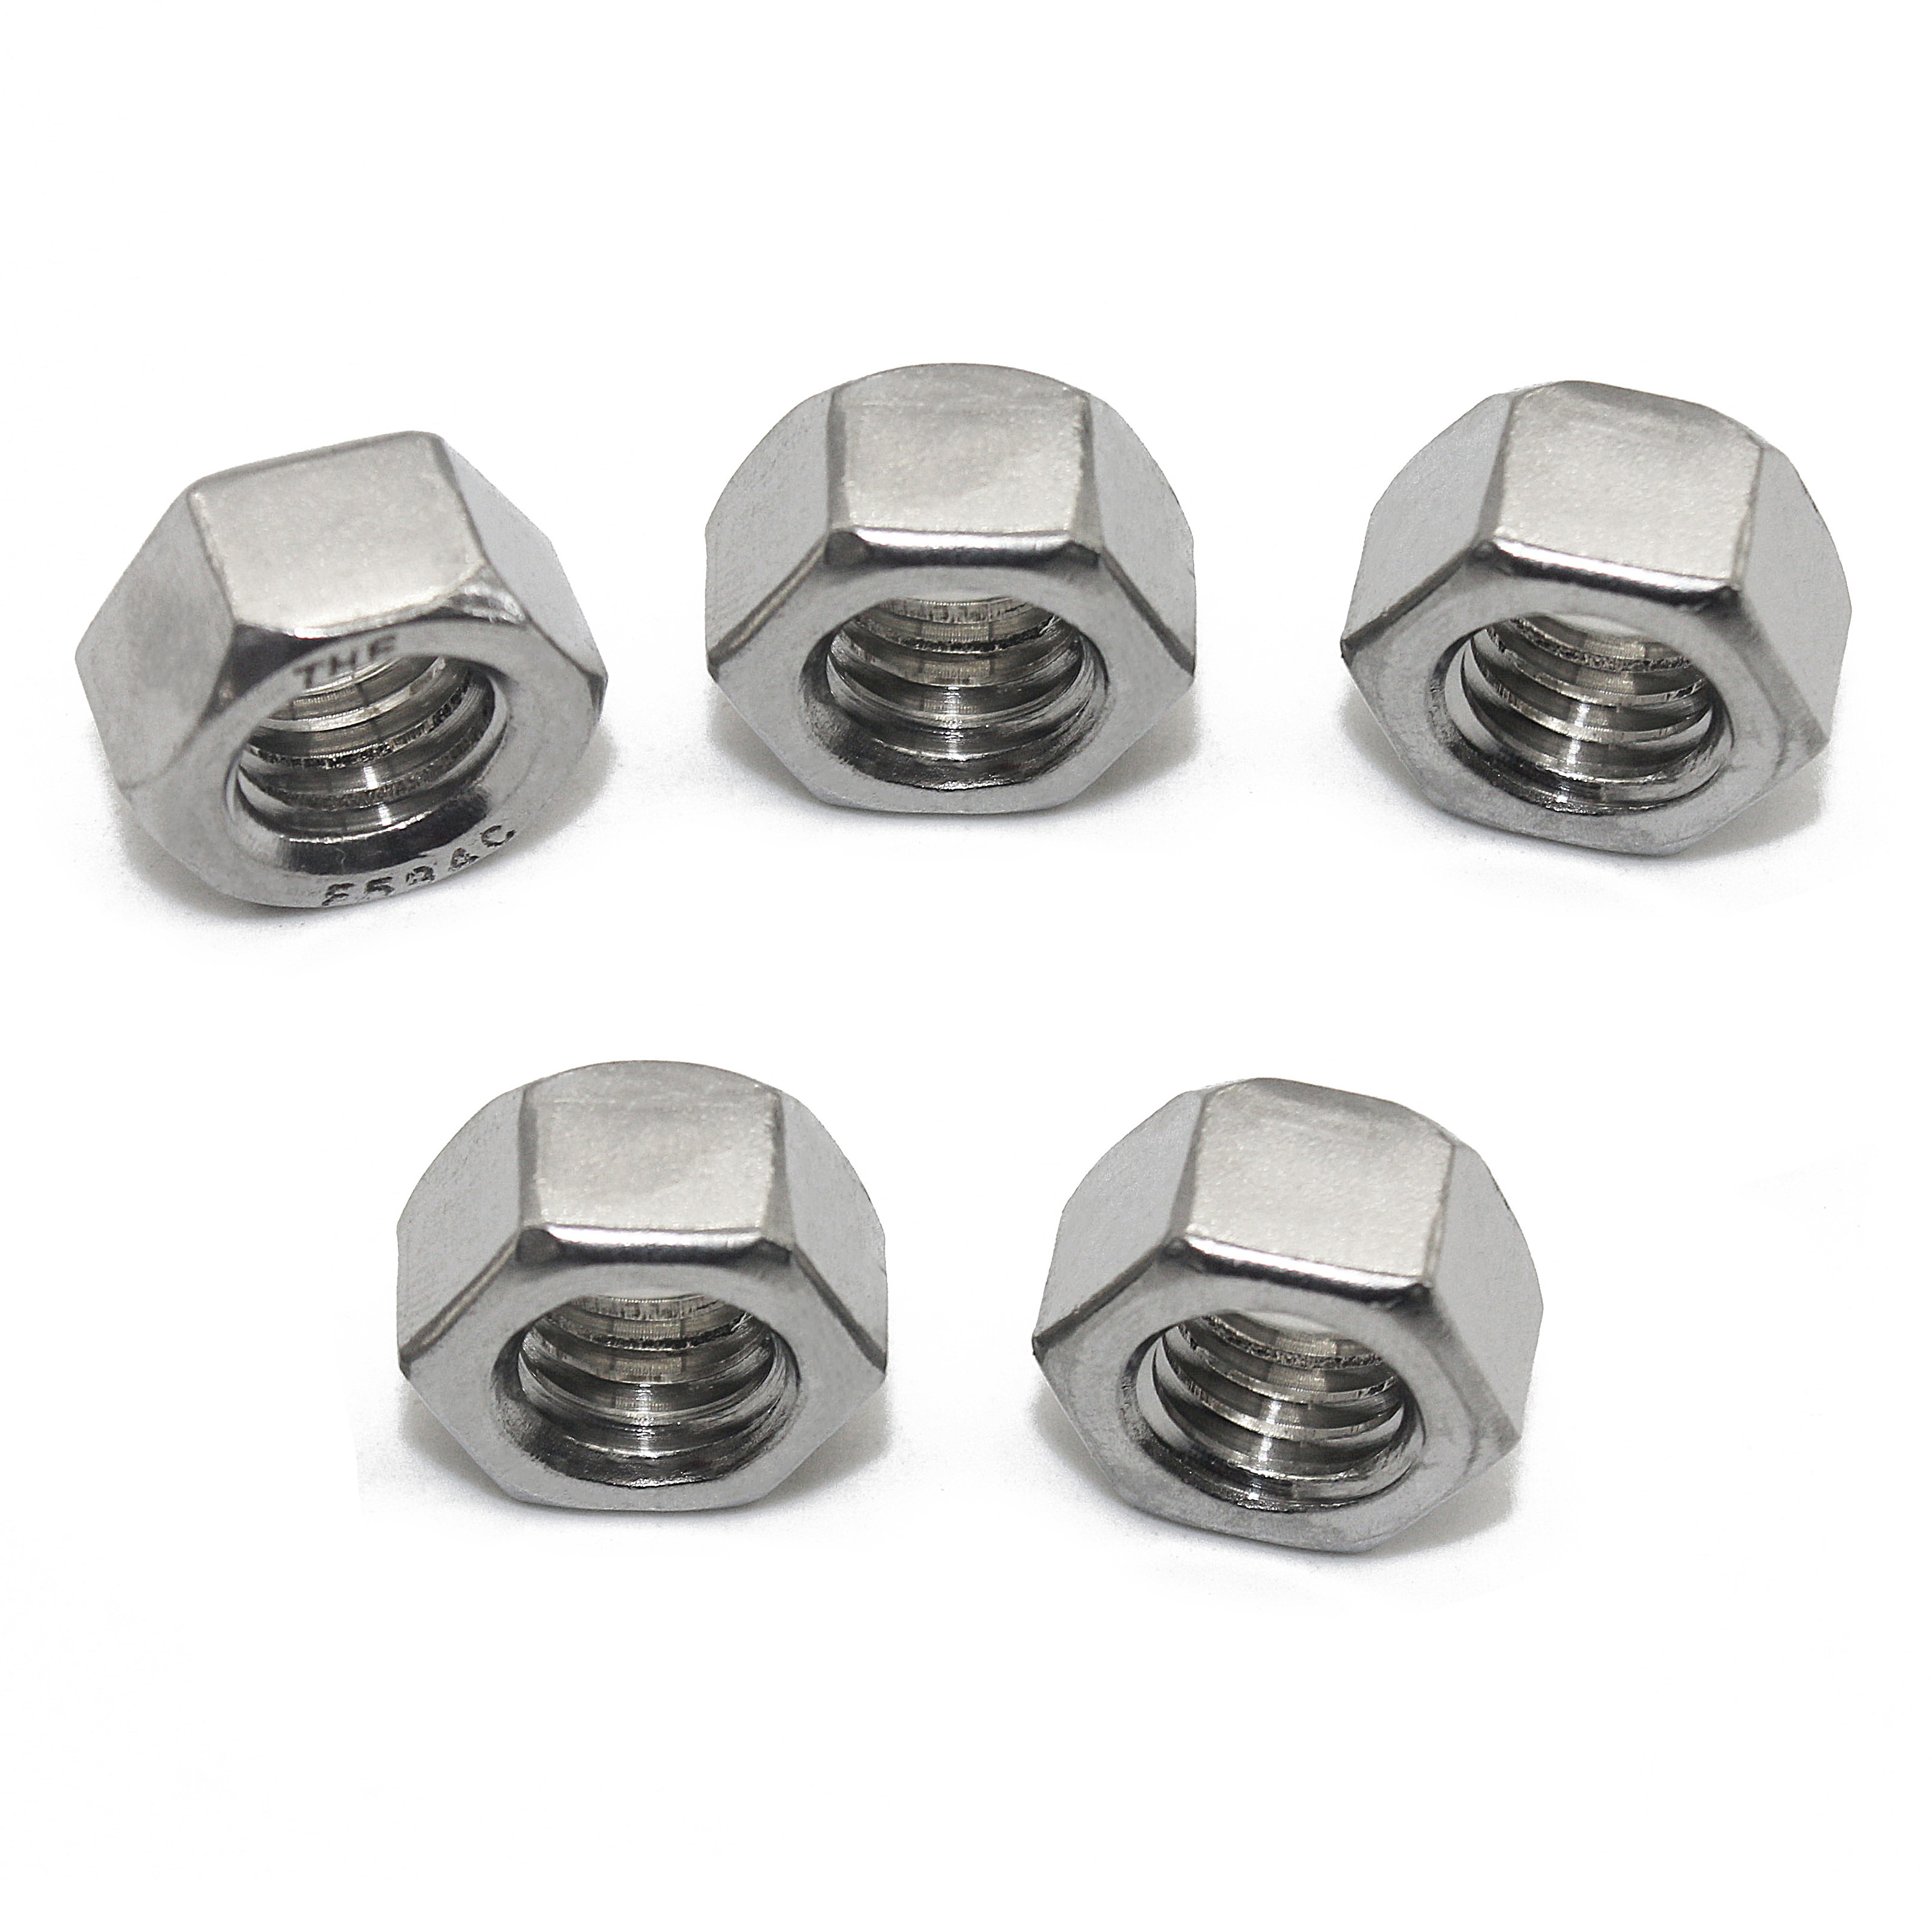 A2 Stainless Steel Flange Nuts to Fit Metric Bolts &Screw M3,M4,M5,M6,M8,M10,M12